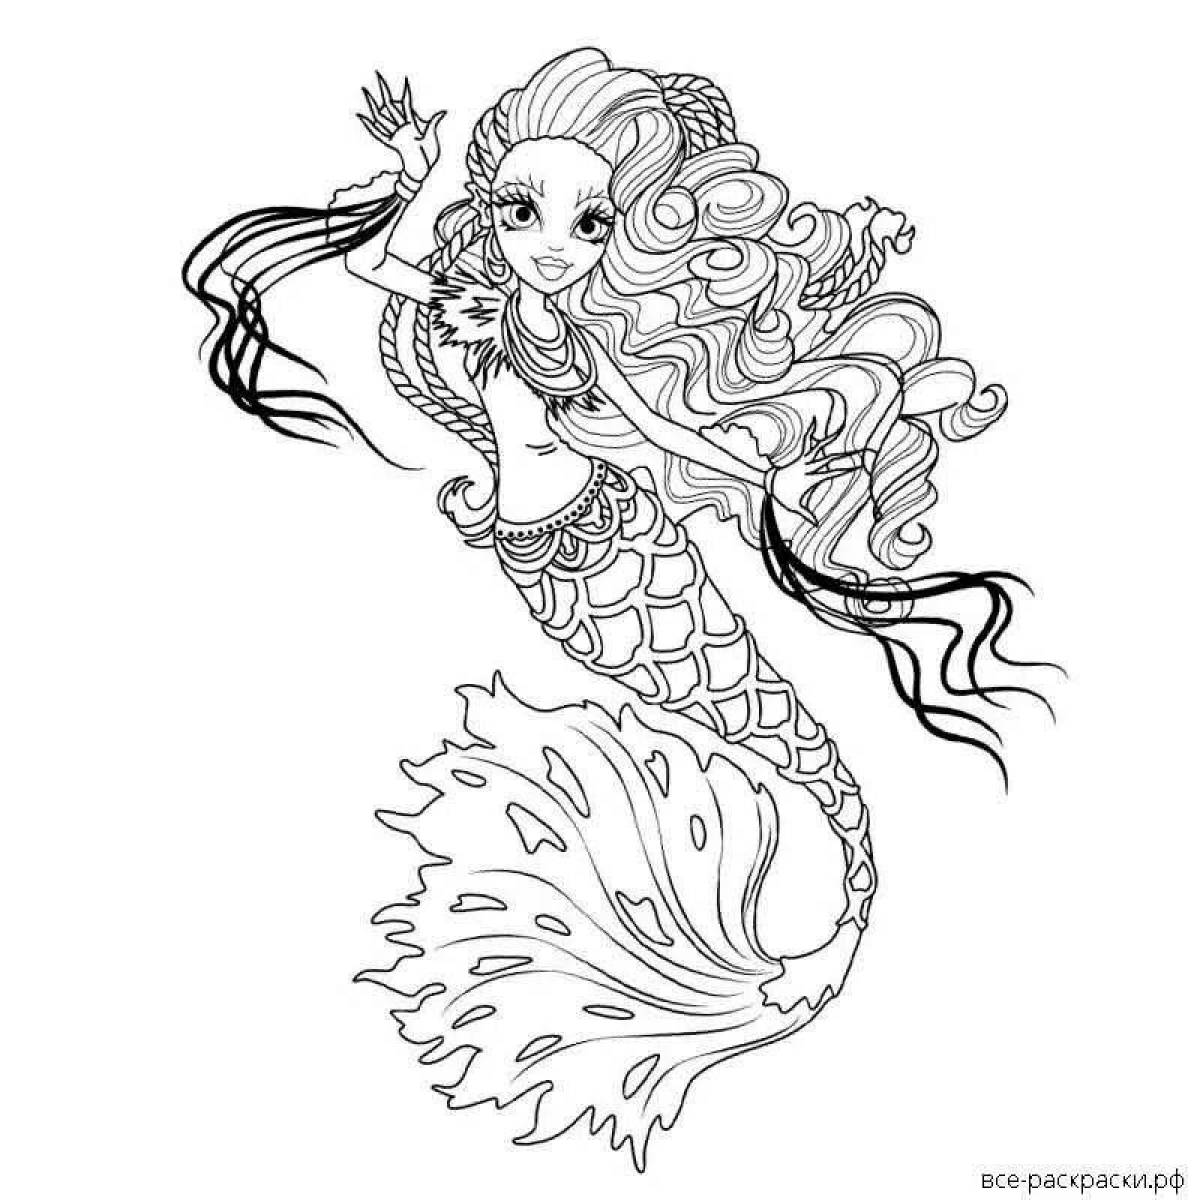 Great sirenhead coloring page